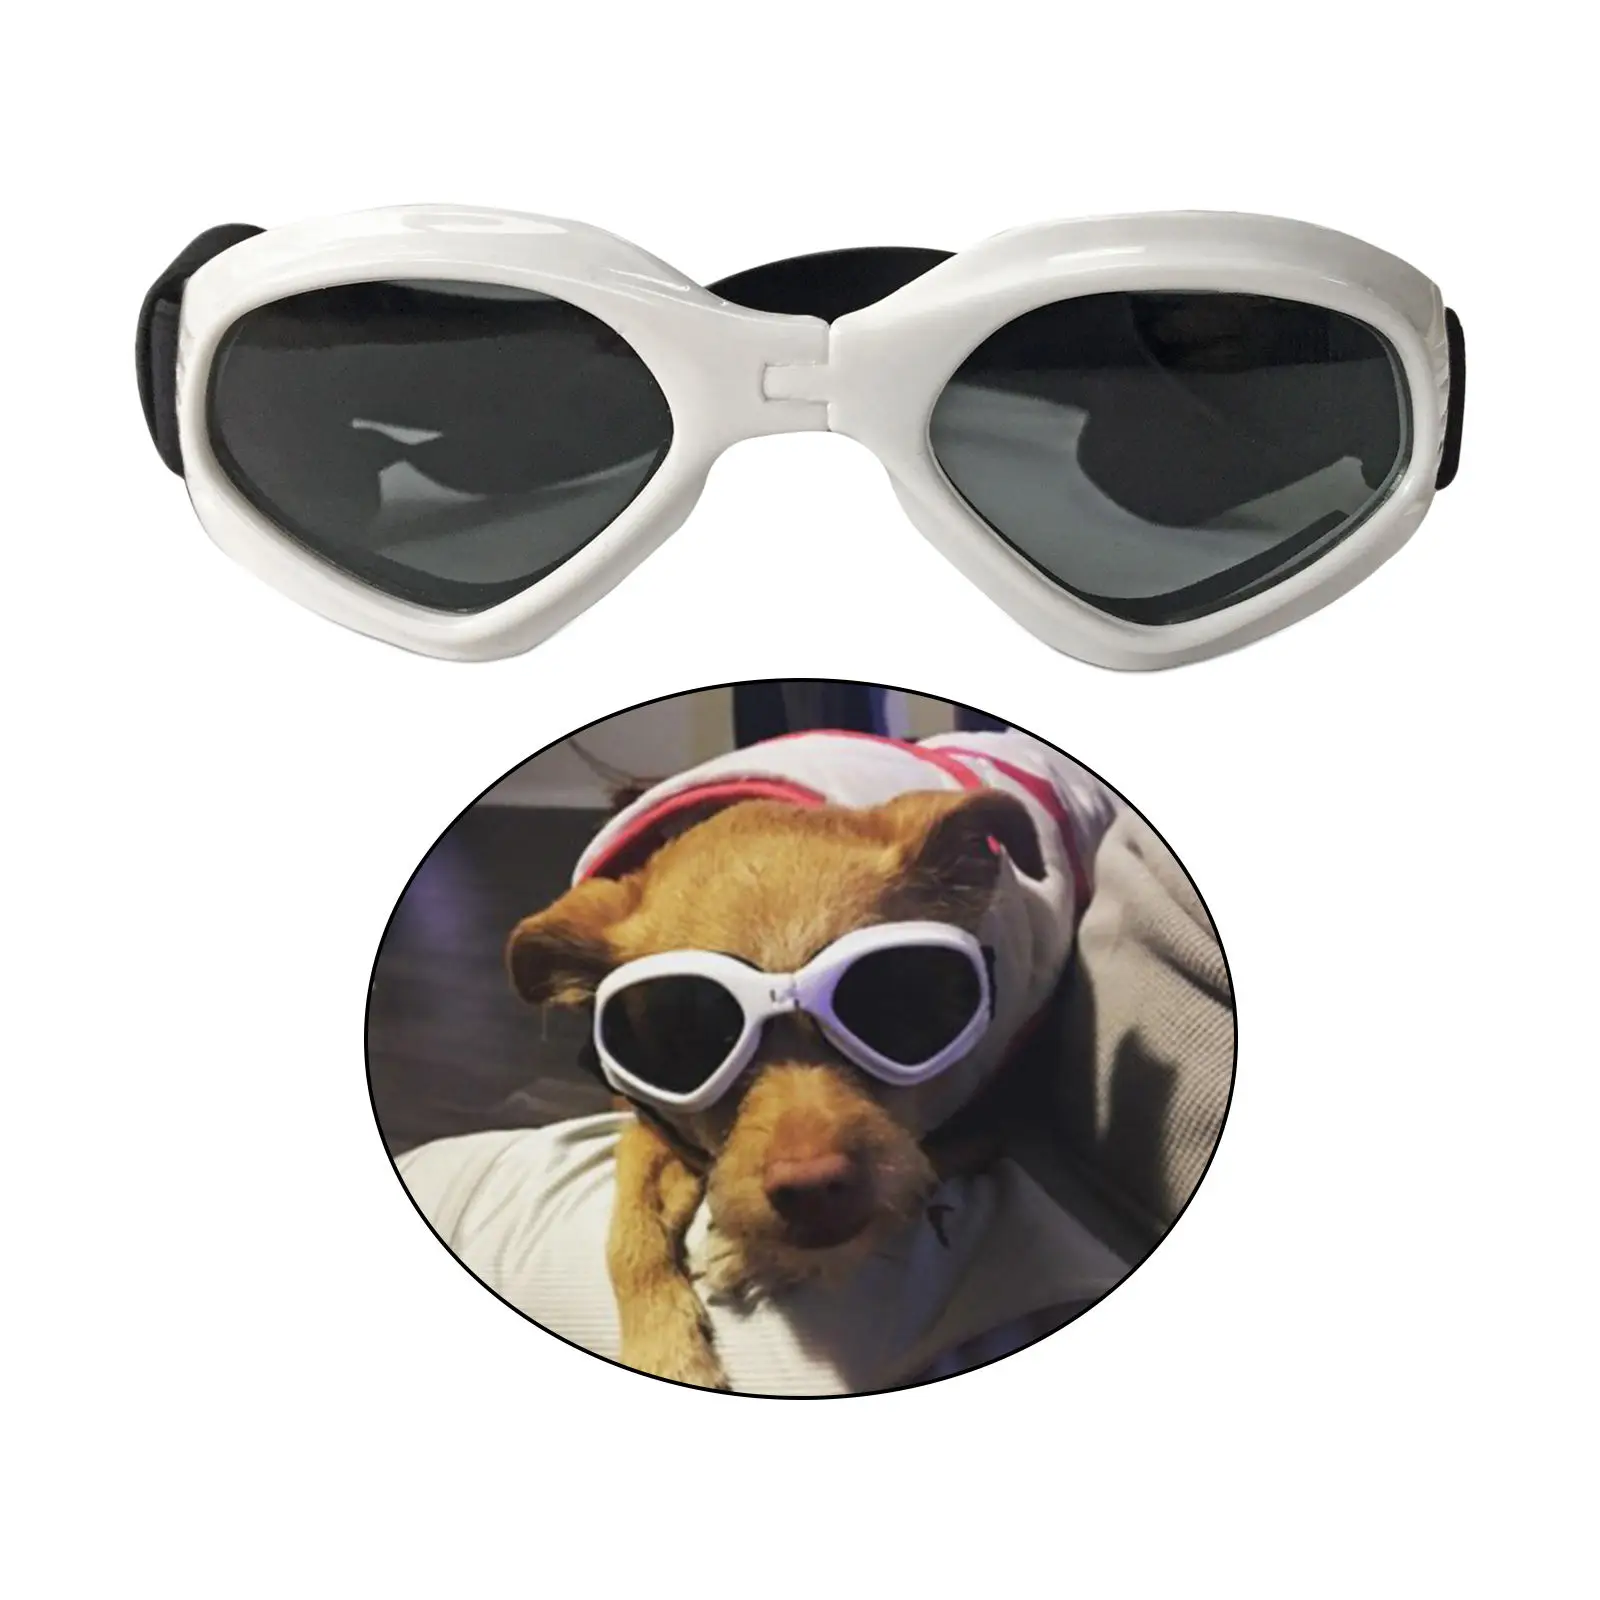 Dog Sunglasses Eye Wear with Adjustable Strap Cool Goggles Dust Protection Foldable Anti-Breaking for Travel Skiing Medium Dog